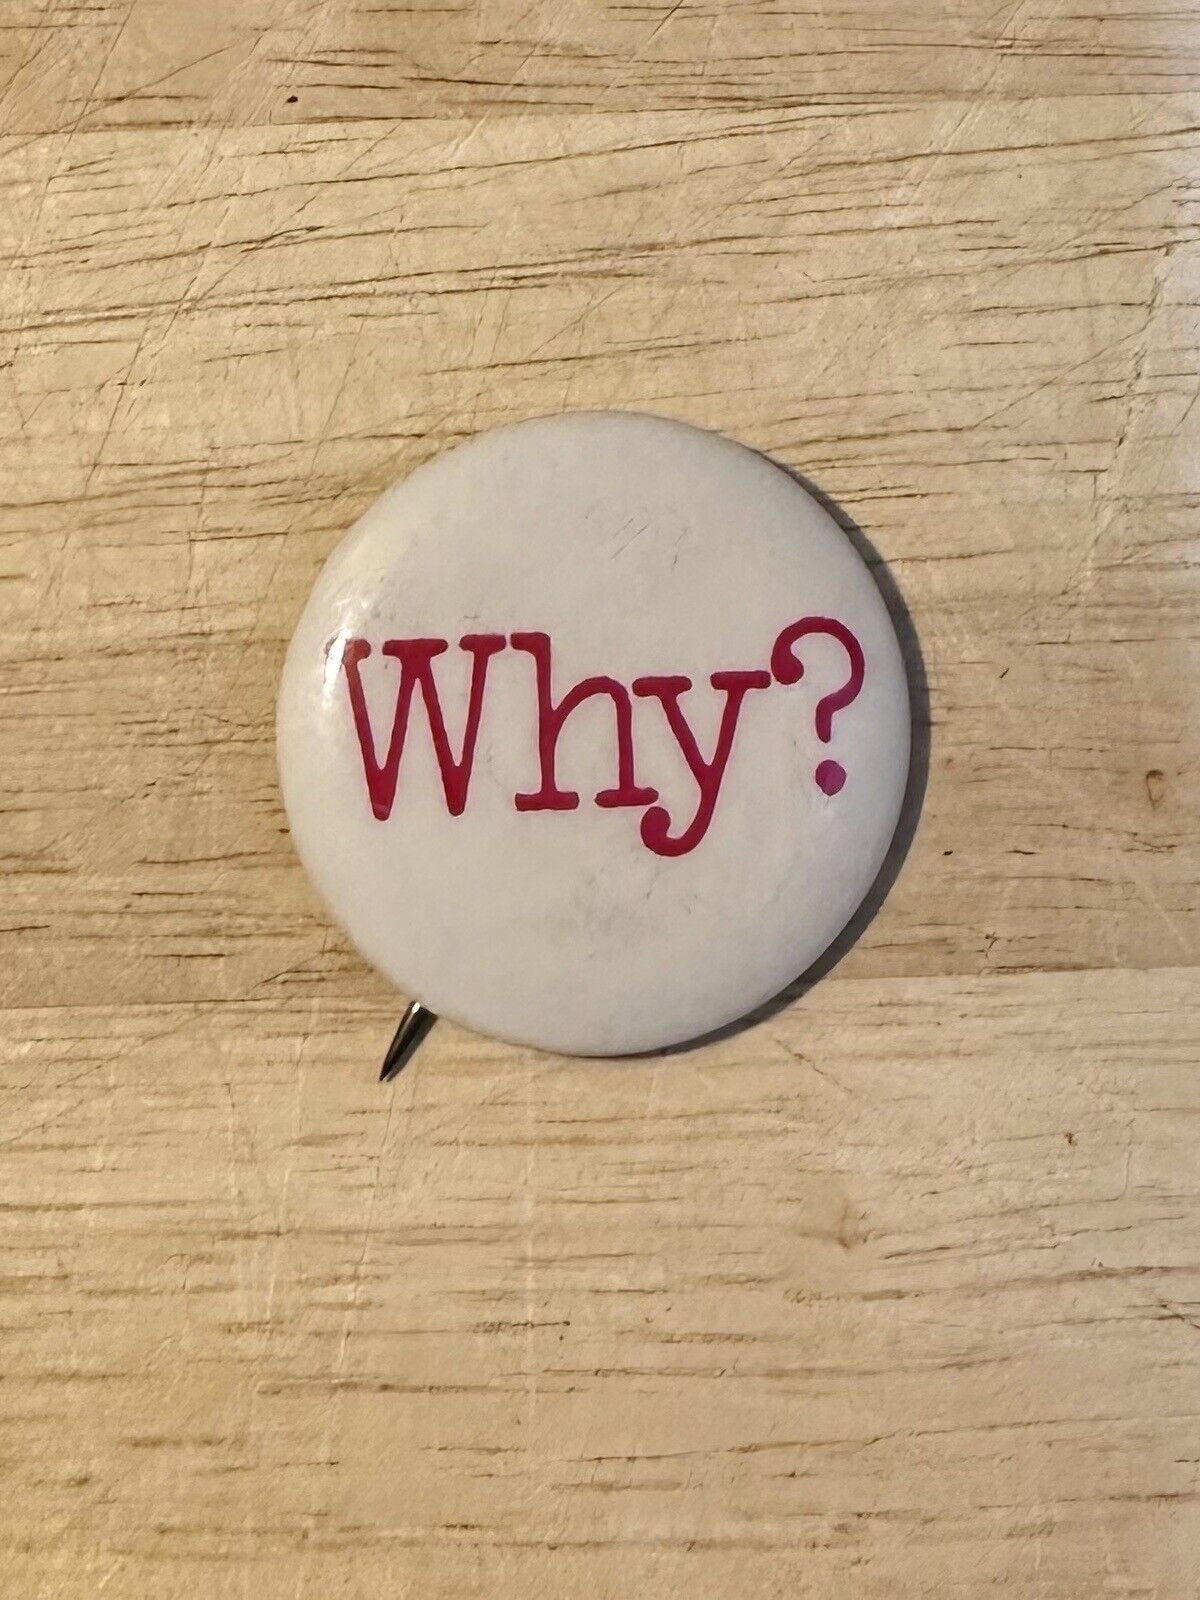 Vintage WHY? Button Pinback Pin Badge Unusual Political